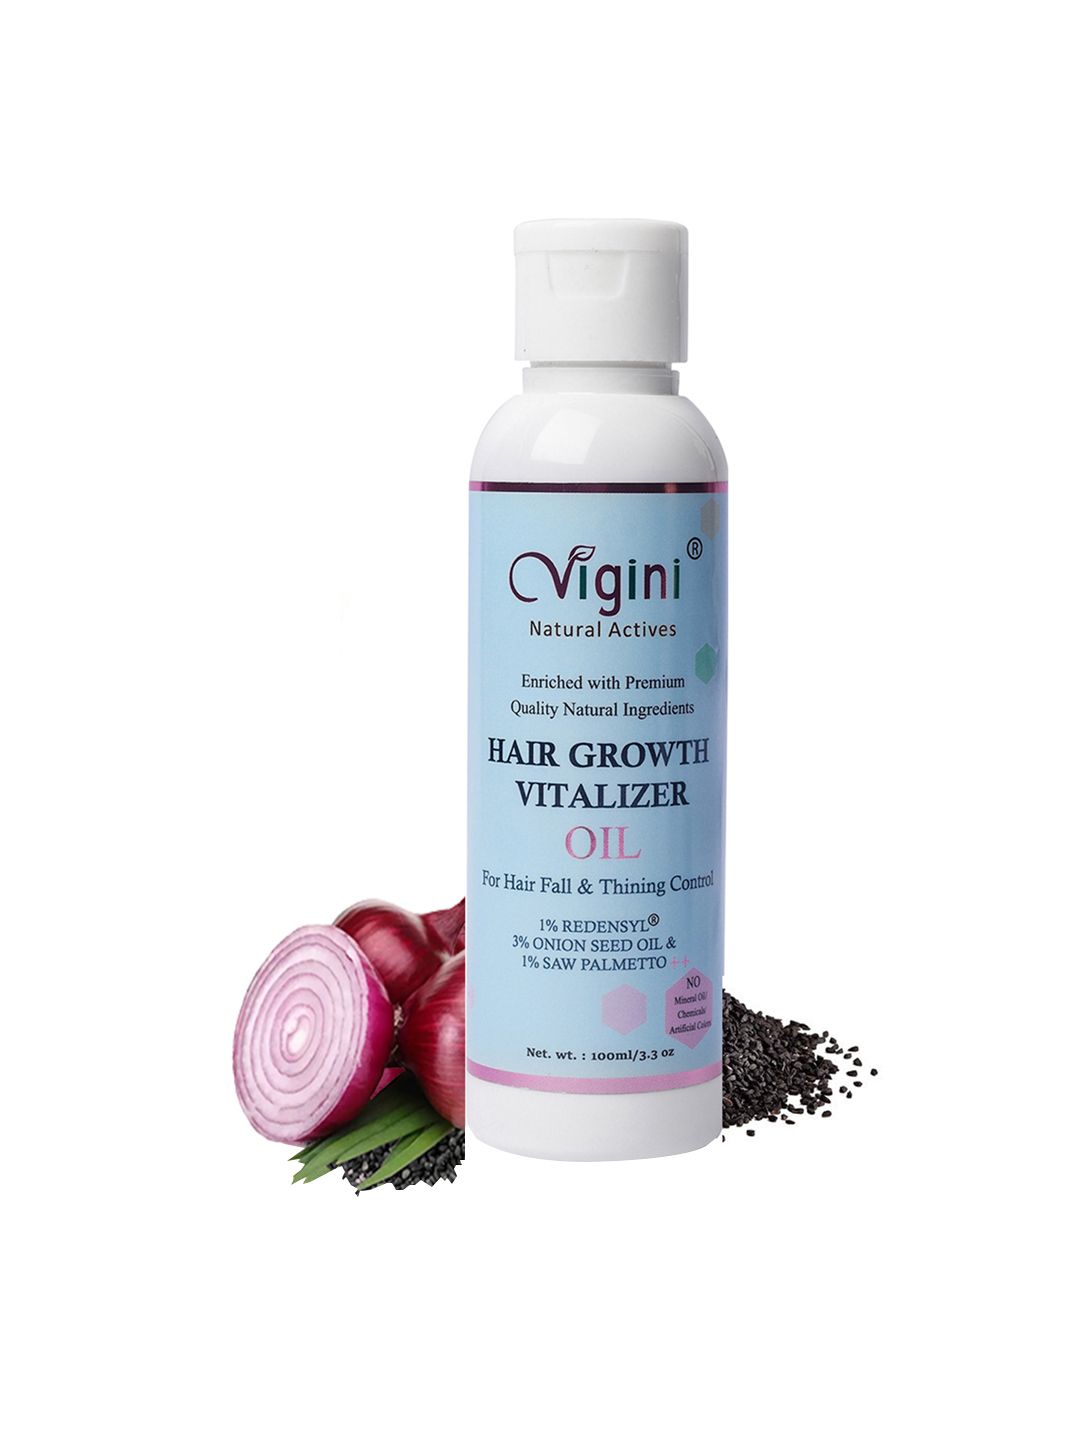 Vigini Natural Actives Hair Growth Vitalizer Oil with Redensyl & Saw Palmetto 100 ml Price in India